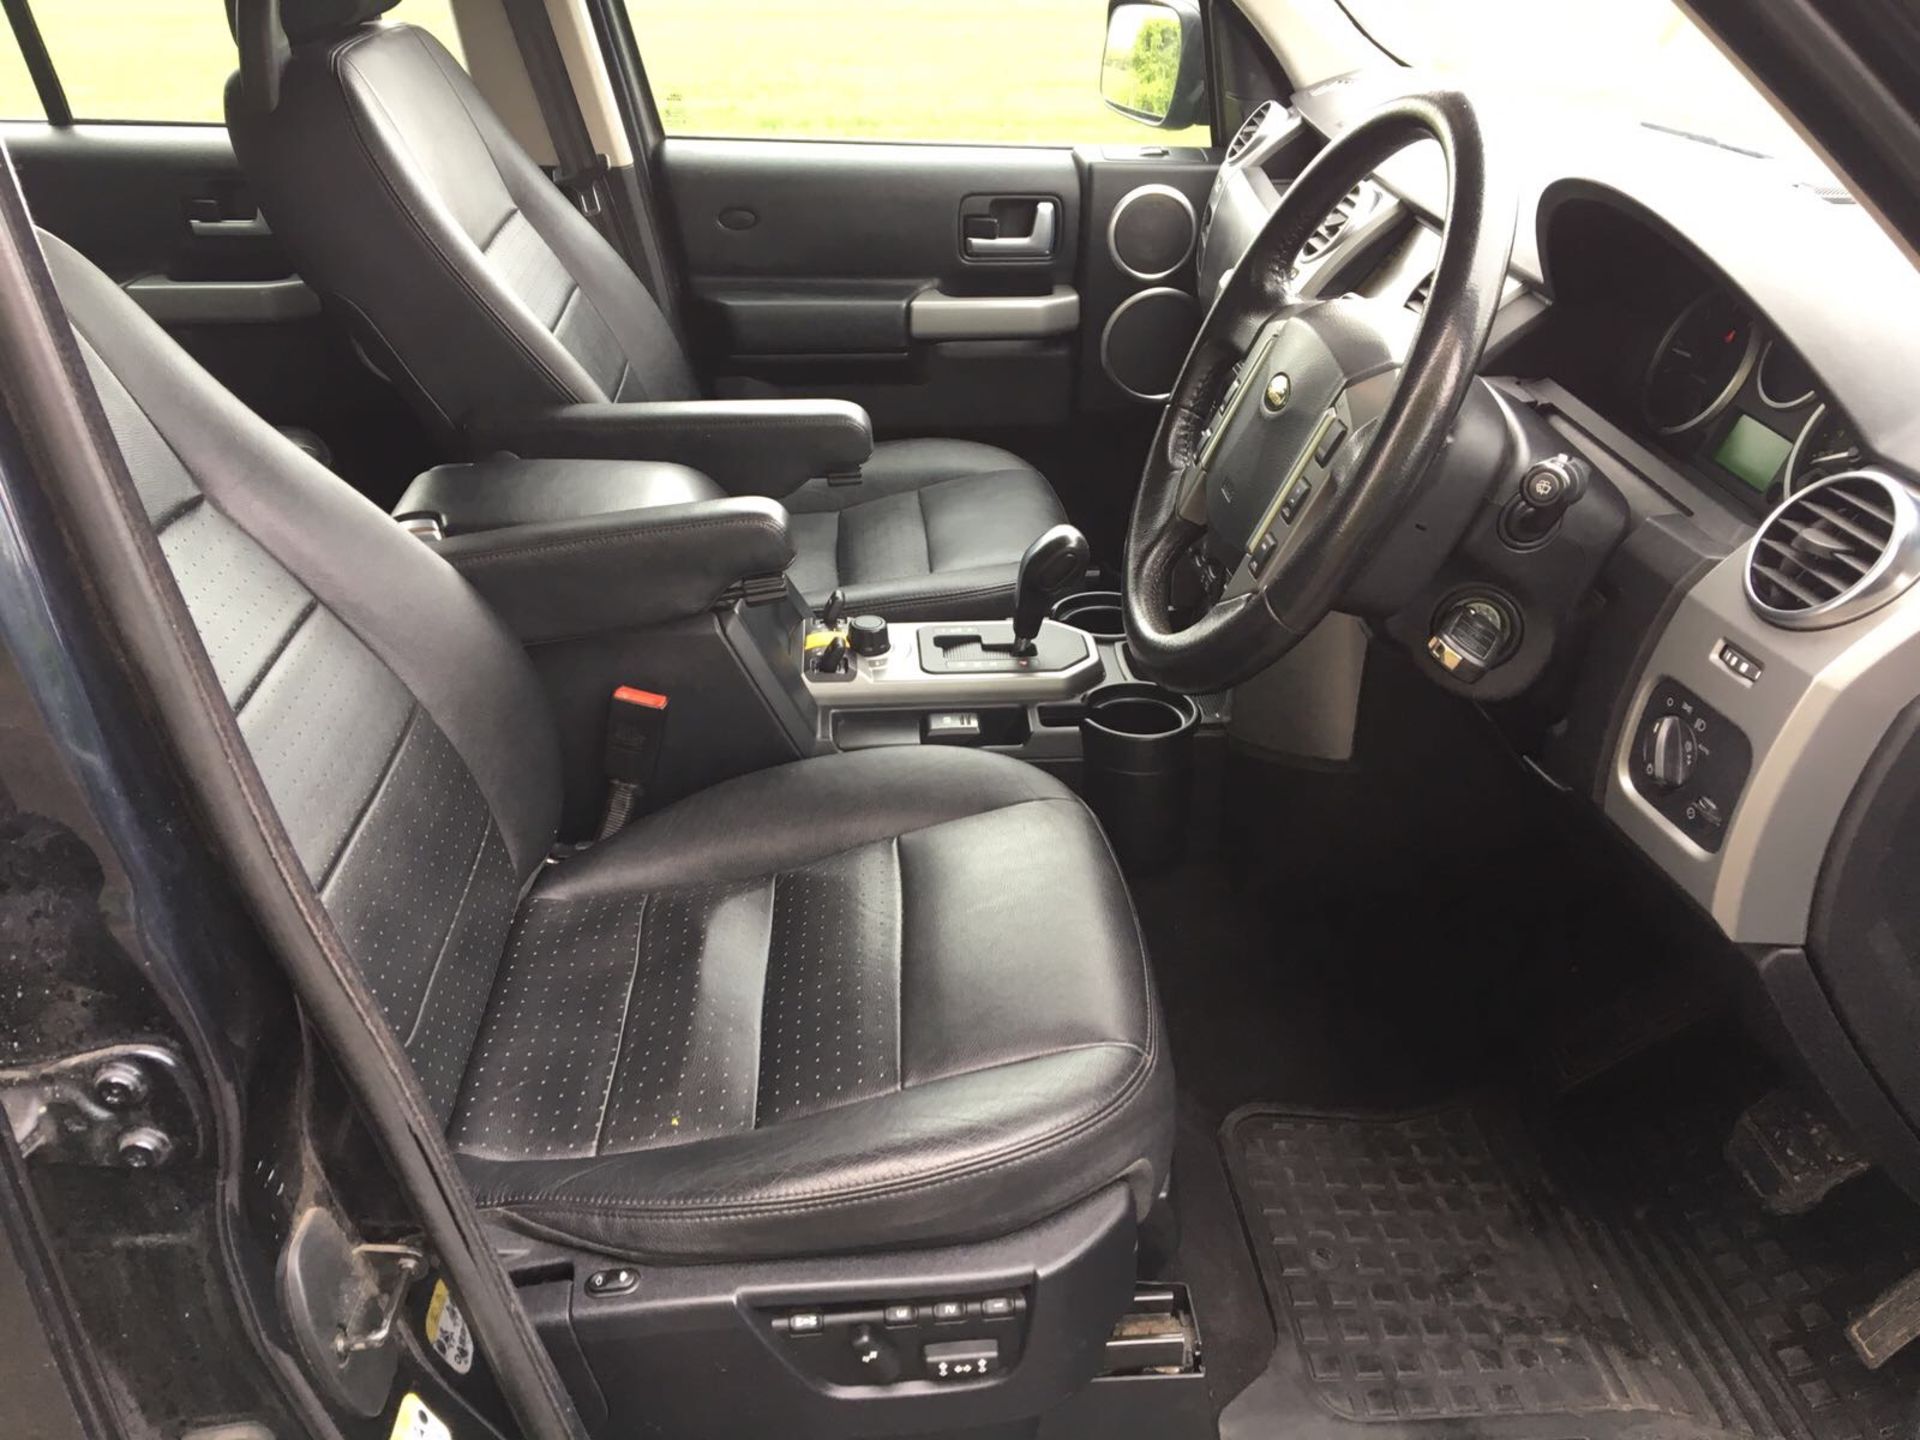 KB - 2007/57 REG LAND ROVER DISCOVERY 3 TDV6 SE AUTOMATIC, SAT NAV, AIR CON, HEATED SEATS ETC   DATE - Image 12 of 16